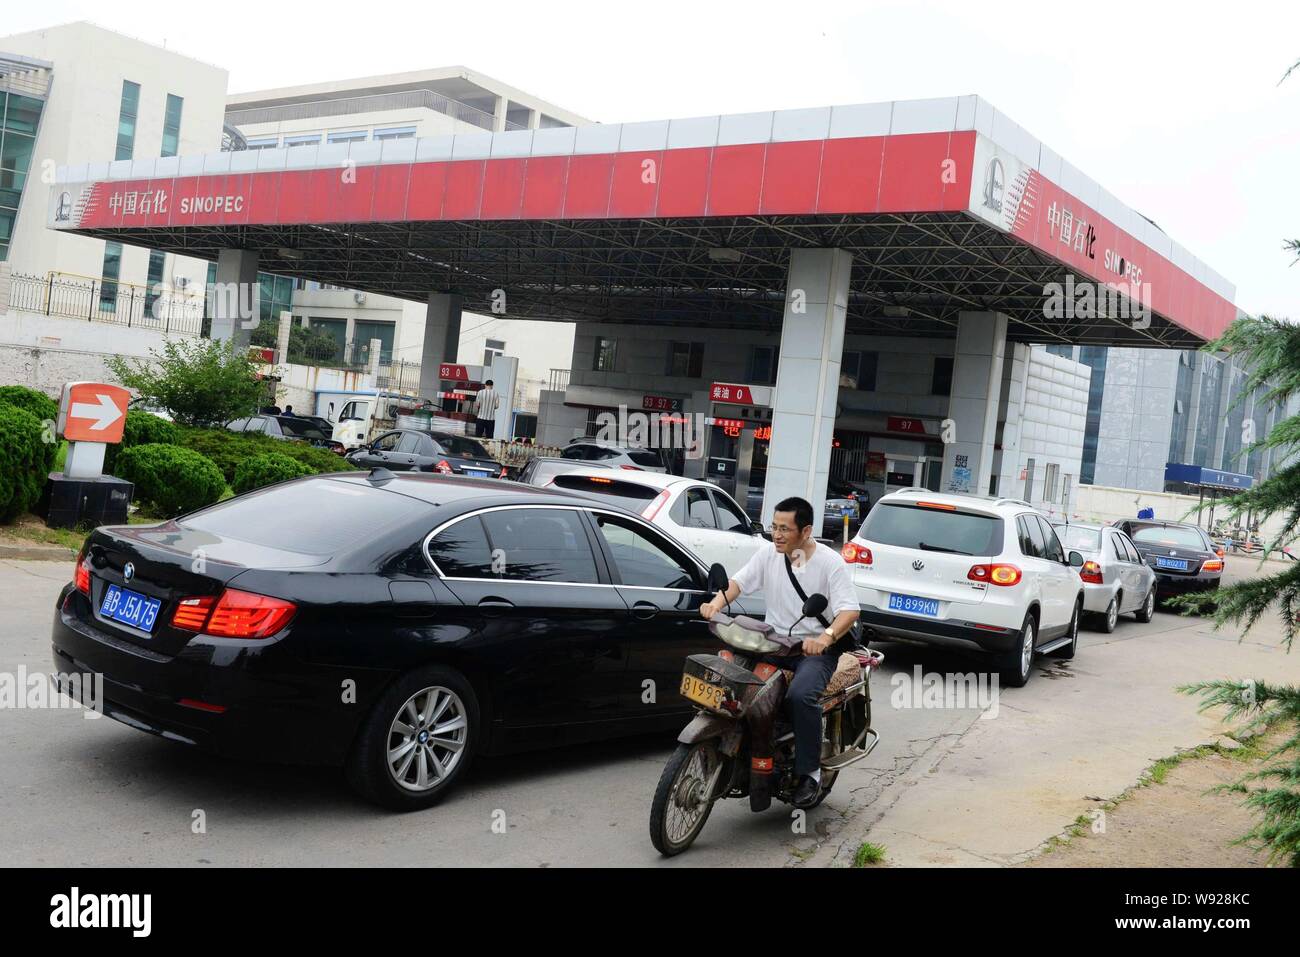 --FILE--Vehicles to be refueled wait at a gas station of Sinopec in Qingdao, east Chinas Shandong province, 18 July 2013.    Chinas largest refiner is Stock Photo